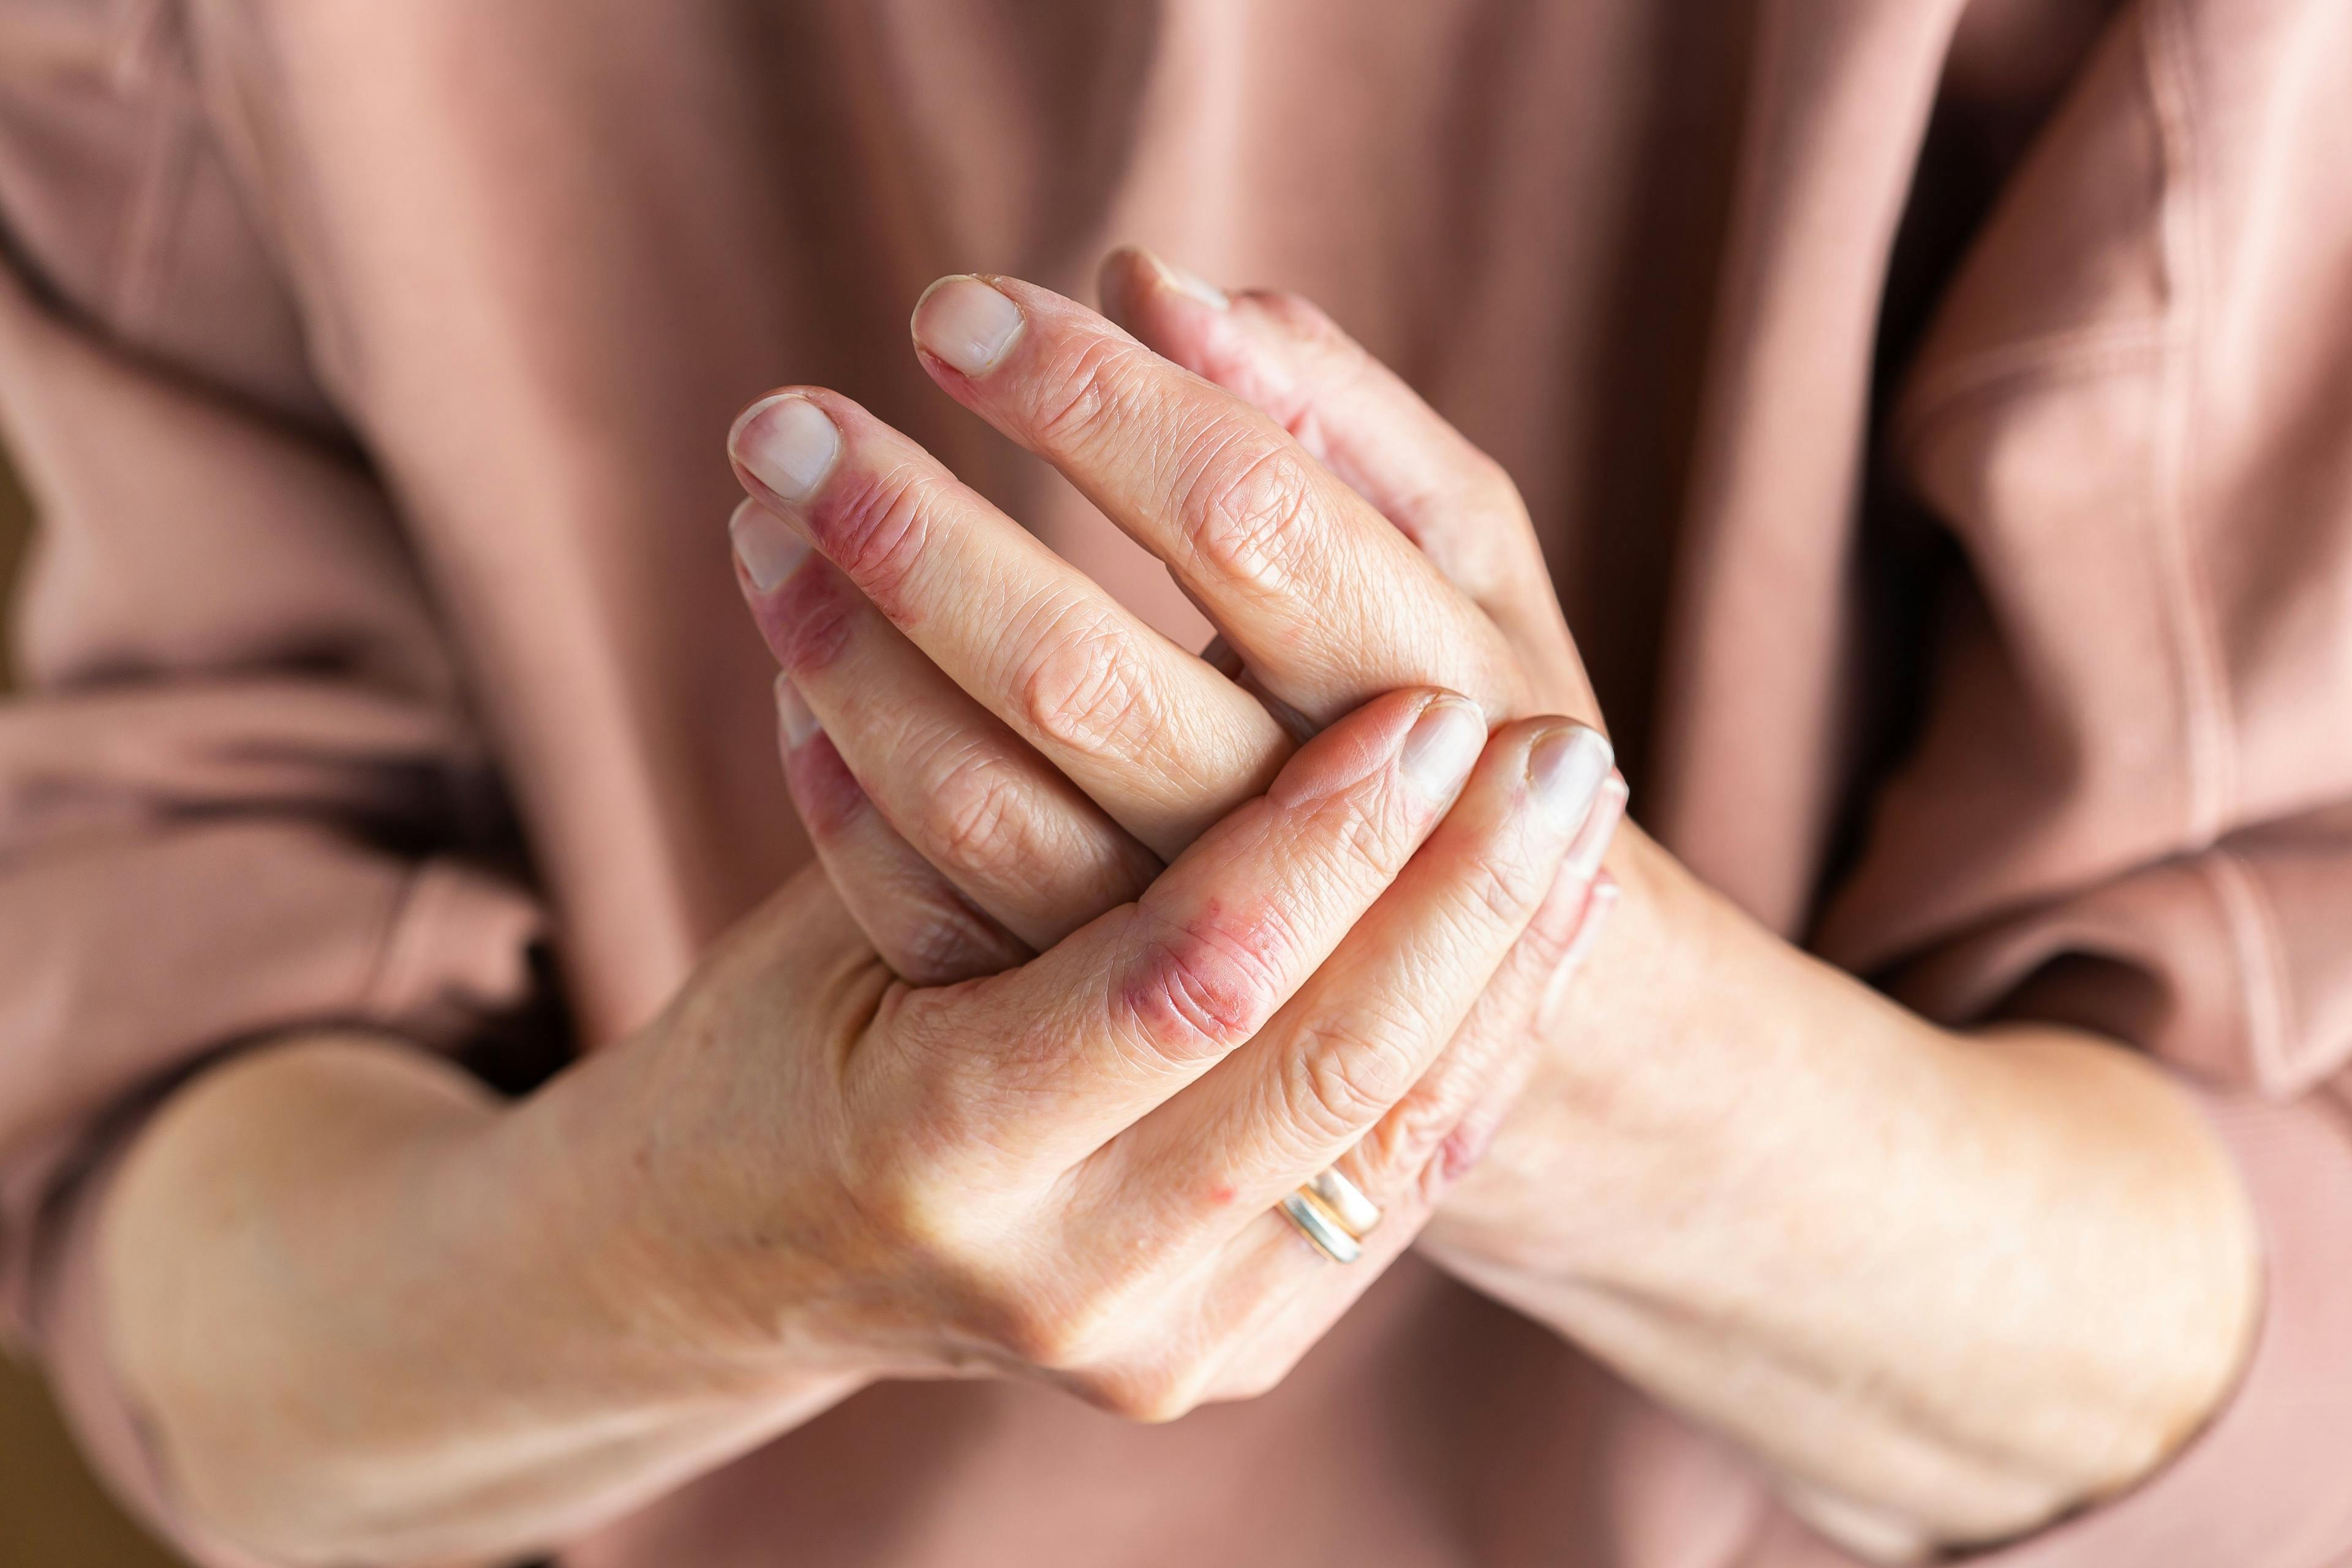 Patient hands with atopic dermatitis | Image Credit: © aamulya - stock.adobe.com